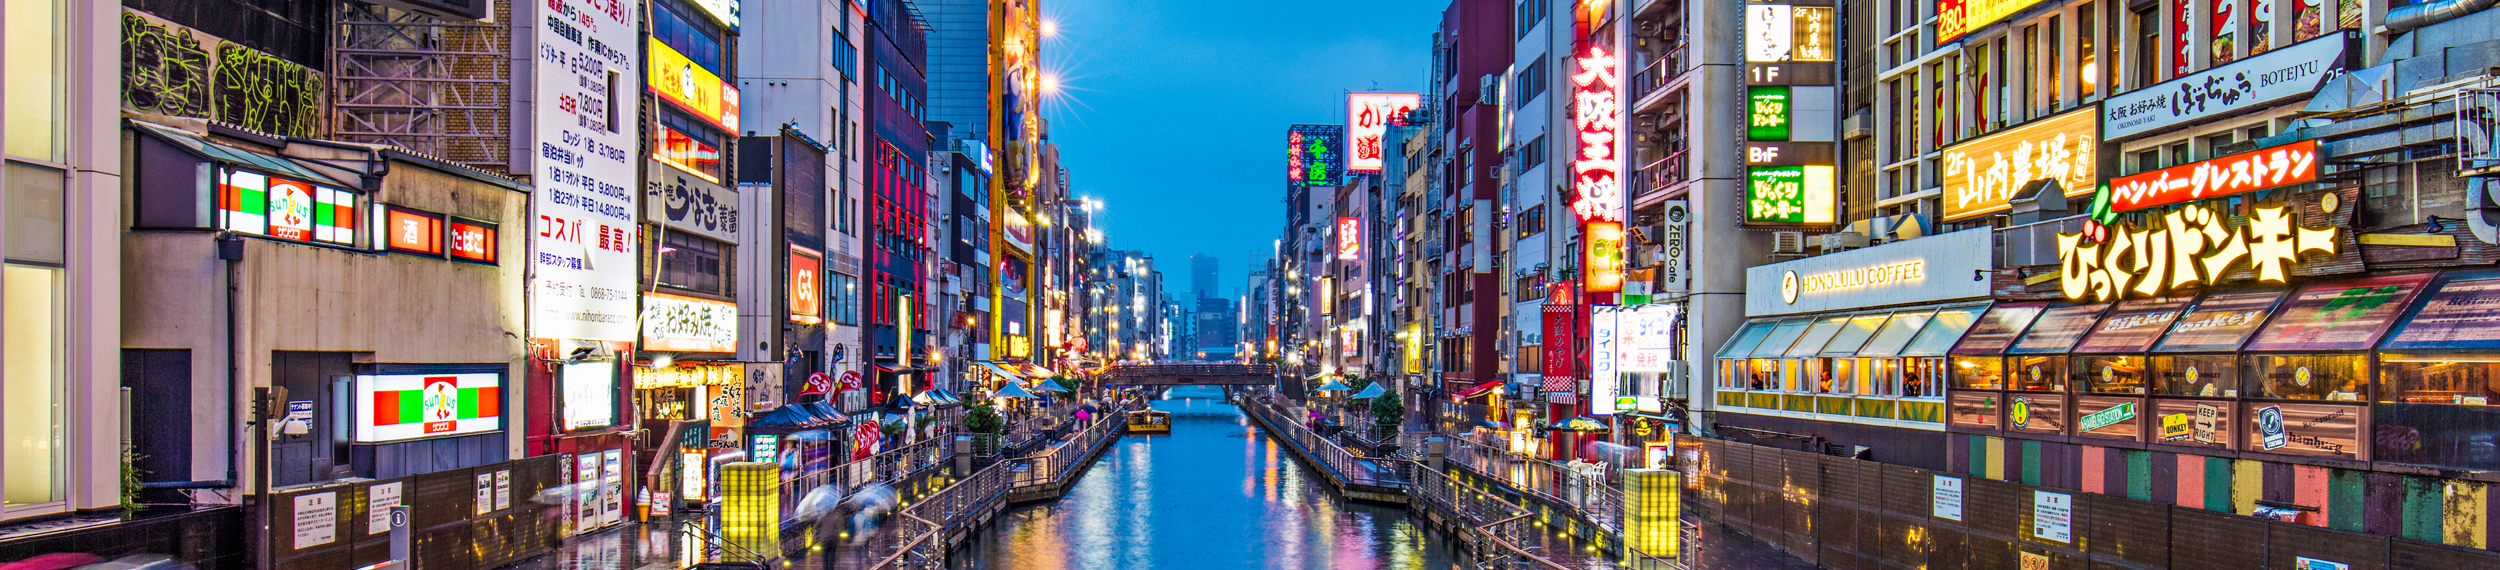 The colourful neon billboards illuminating the restaurants, bars and nightlife of Dotonbori, reflecting in the canal in the heart of Osaka, Japan